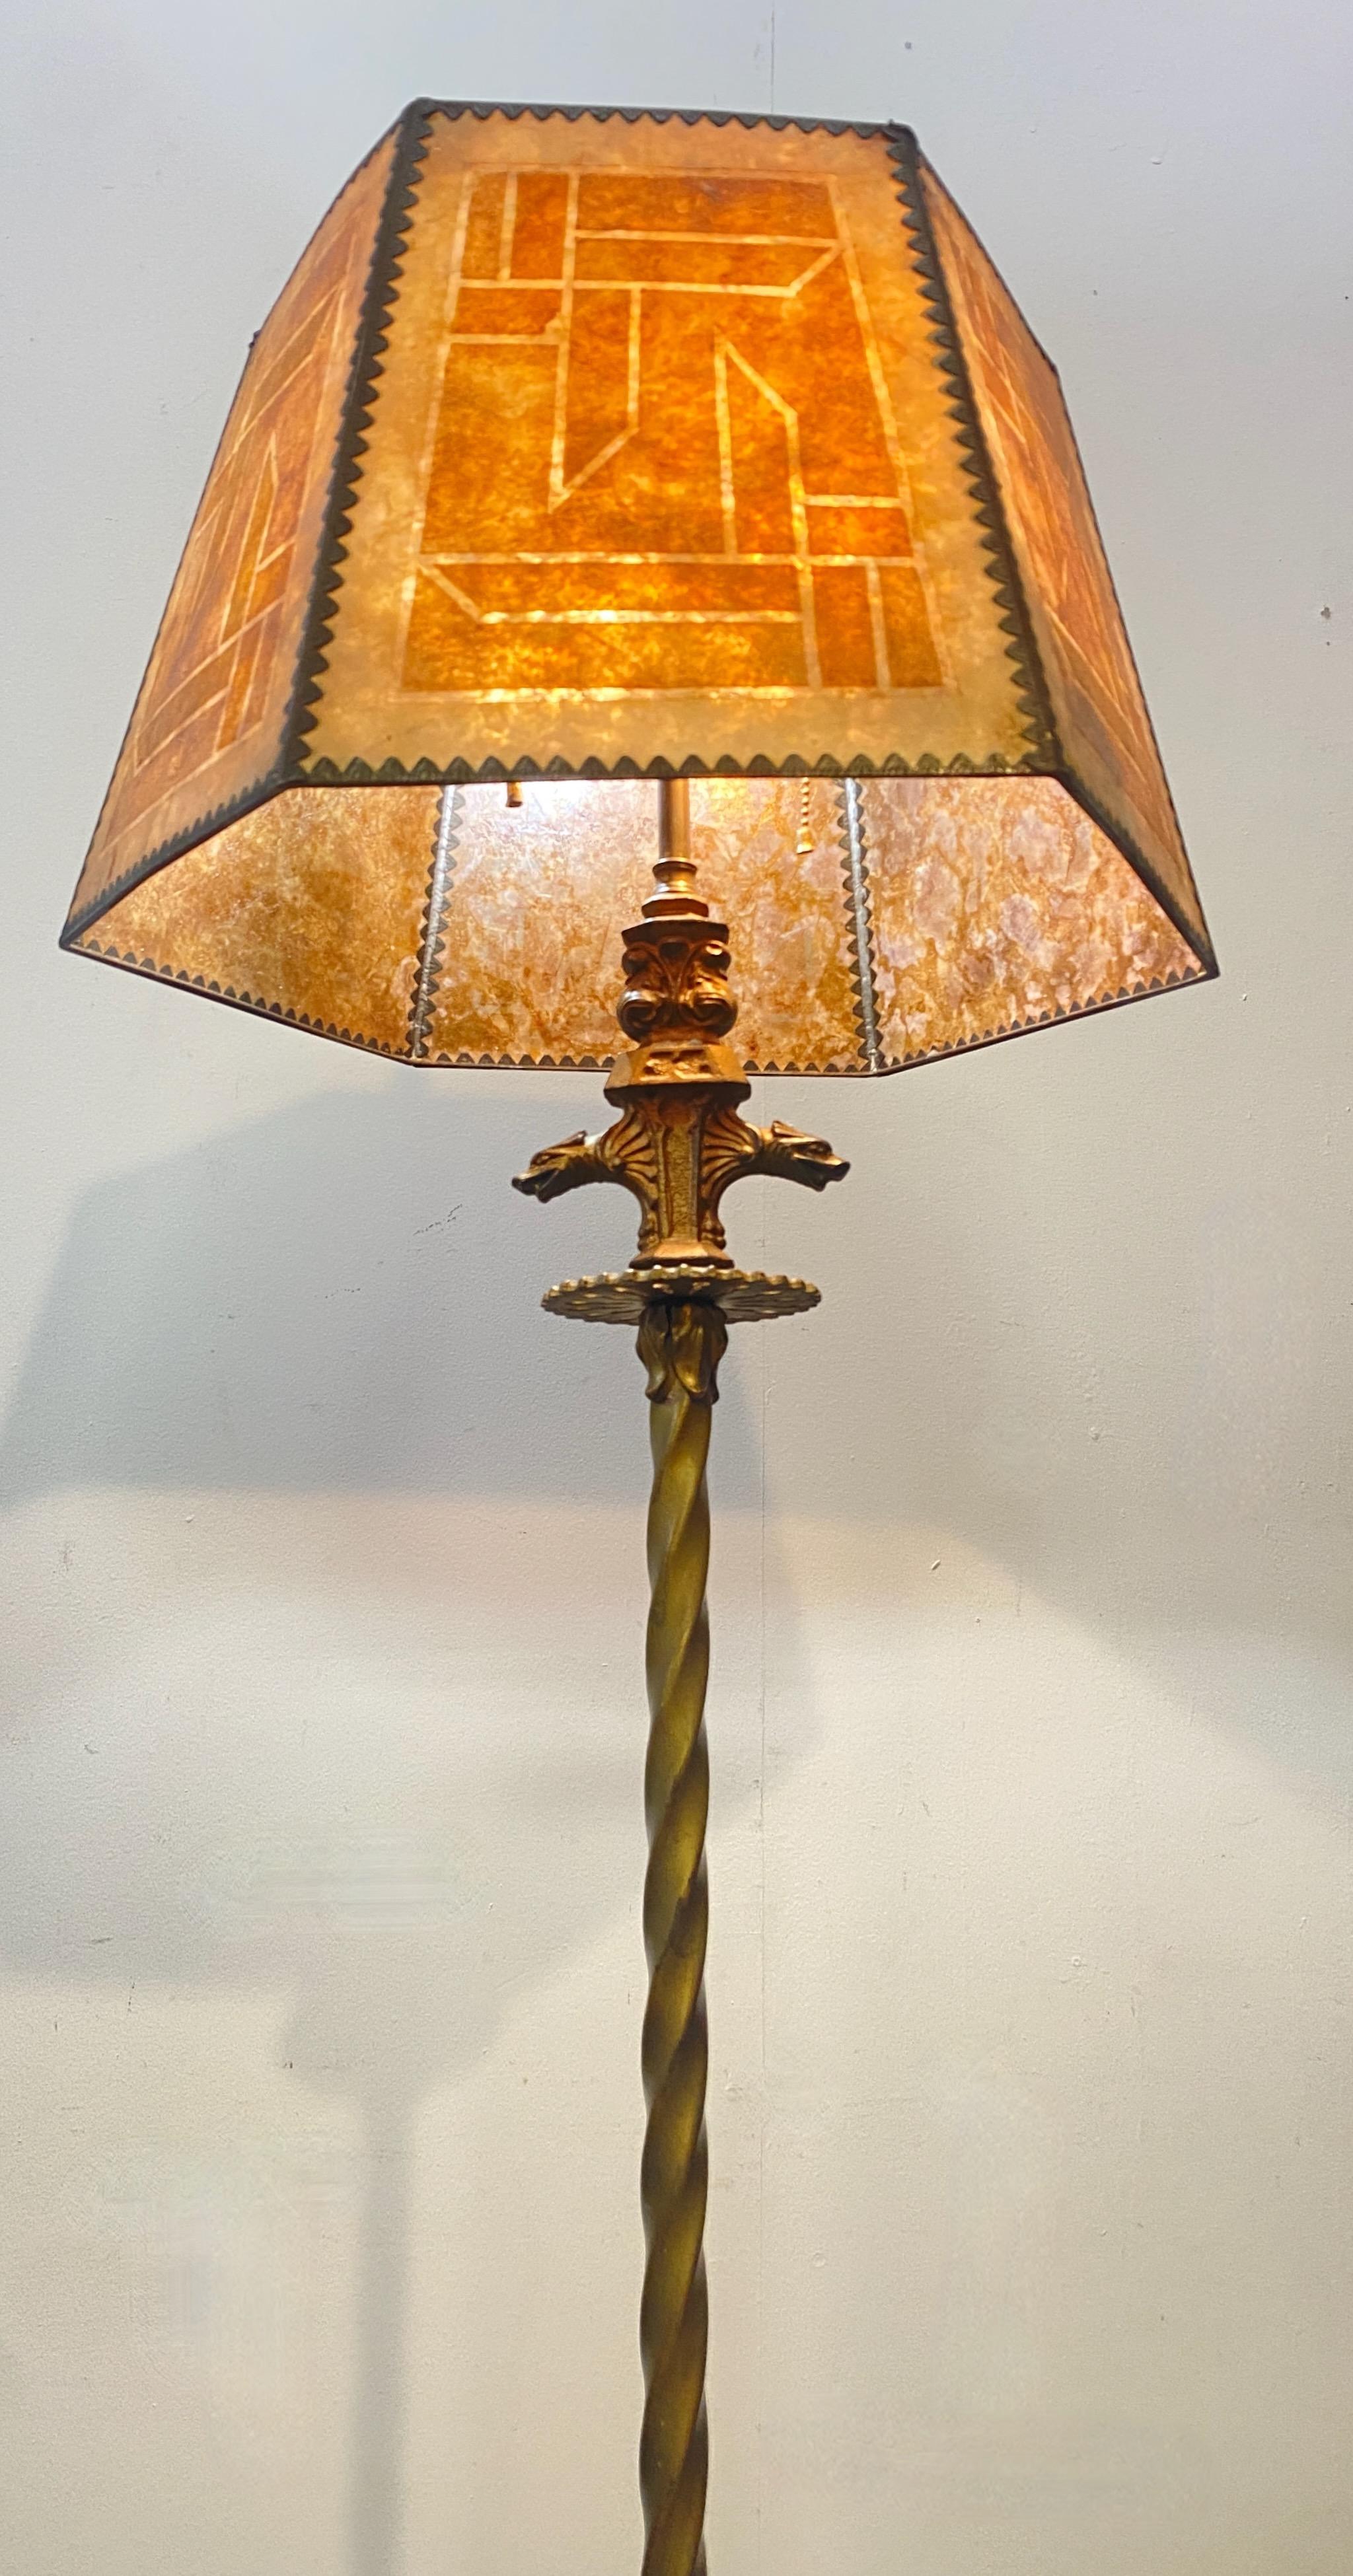 Art Deco period Iron and brass floor with mica shade. 
Excellent quality lamp base with wonderful mica shade having brass framing all the individual panels. 
Recently re-wired.
Diameter of the shade is 18 inches.
American, early 20th century.